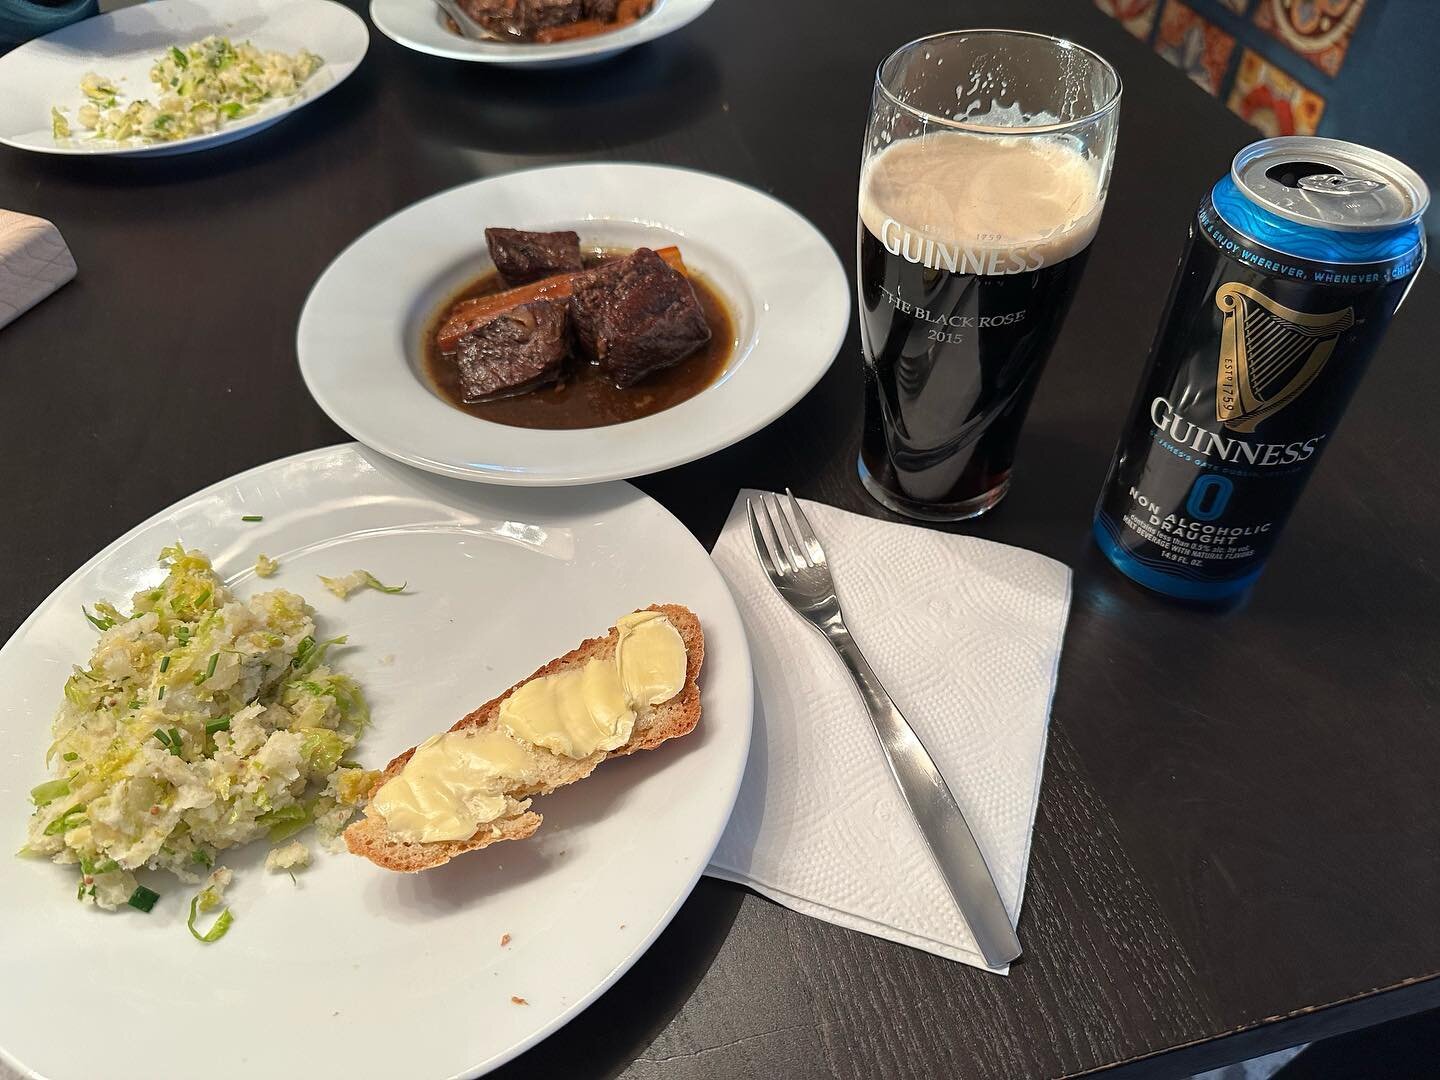 A successful St Patrick&rsquo;s Day was had&hellip;Irish beef stew with carrots, colcannon with Brussels sprouts, Irish soda bread with Kerry Gold butter, non-alcoholic Guinness, and chocolate chip cookie cake with a green frosting shamrock. @sallysb